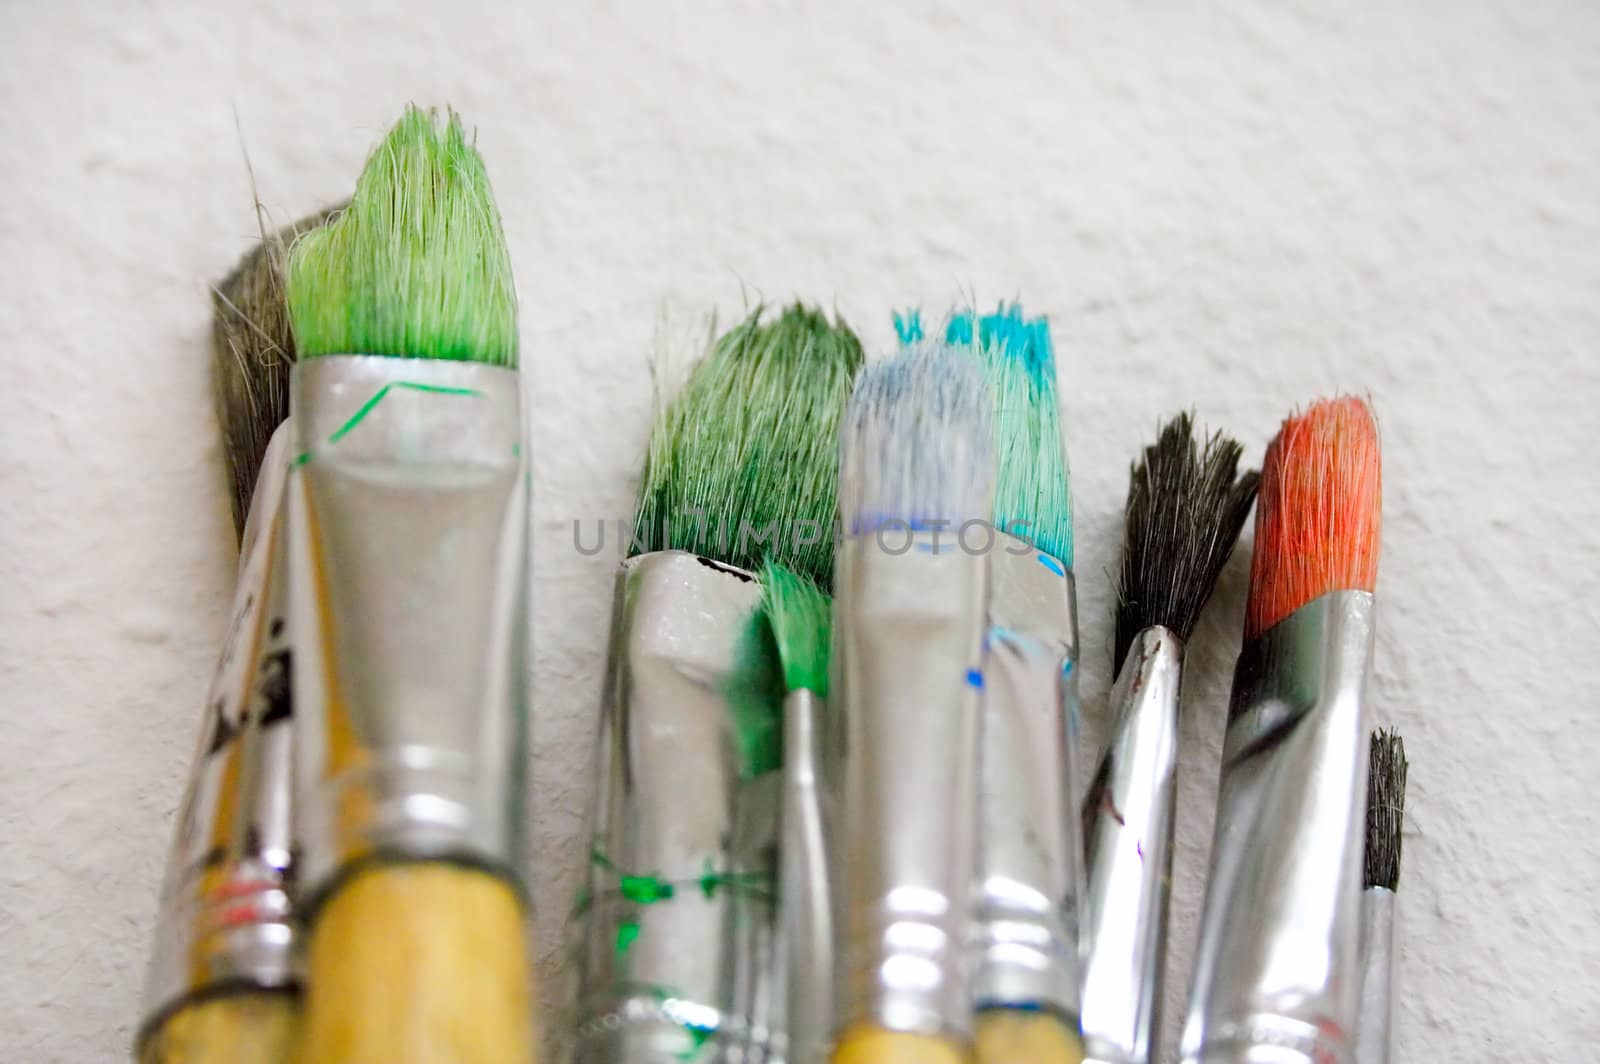 Bunch of Paintbrushes Close-Up by winterling